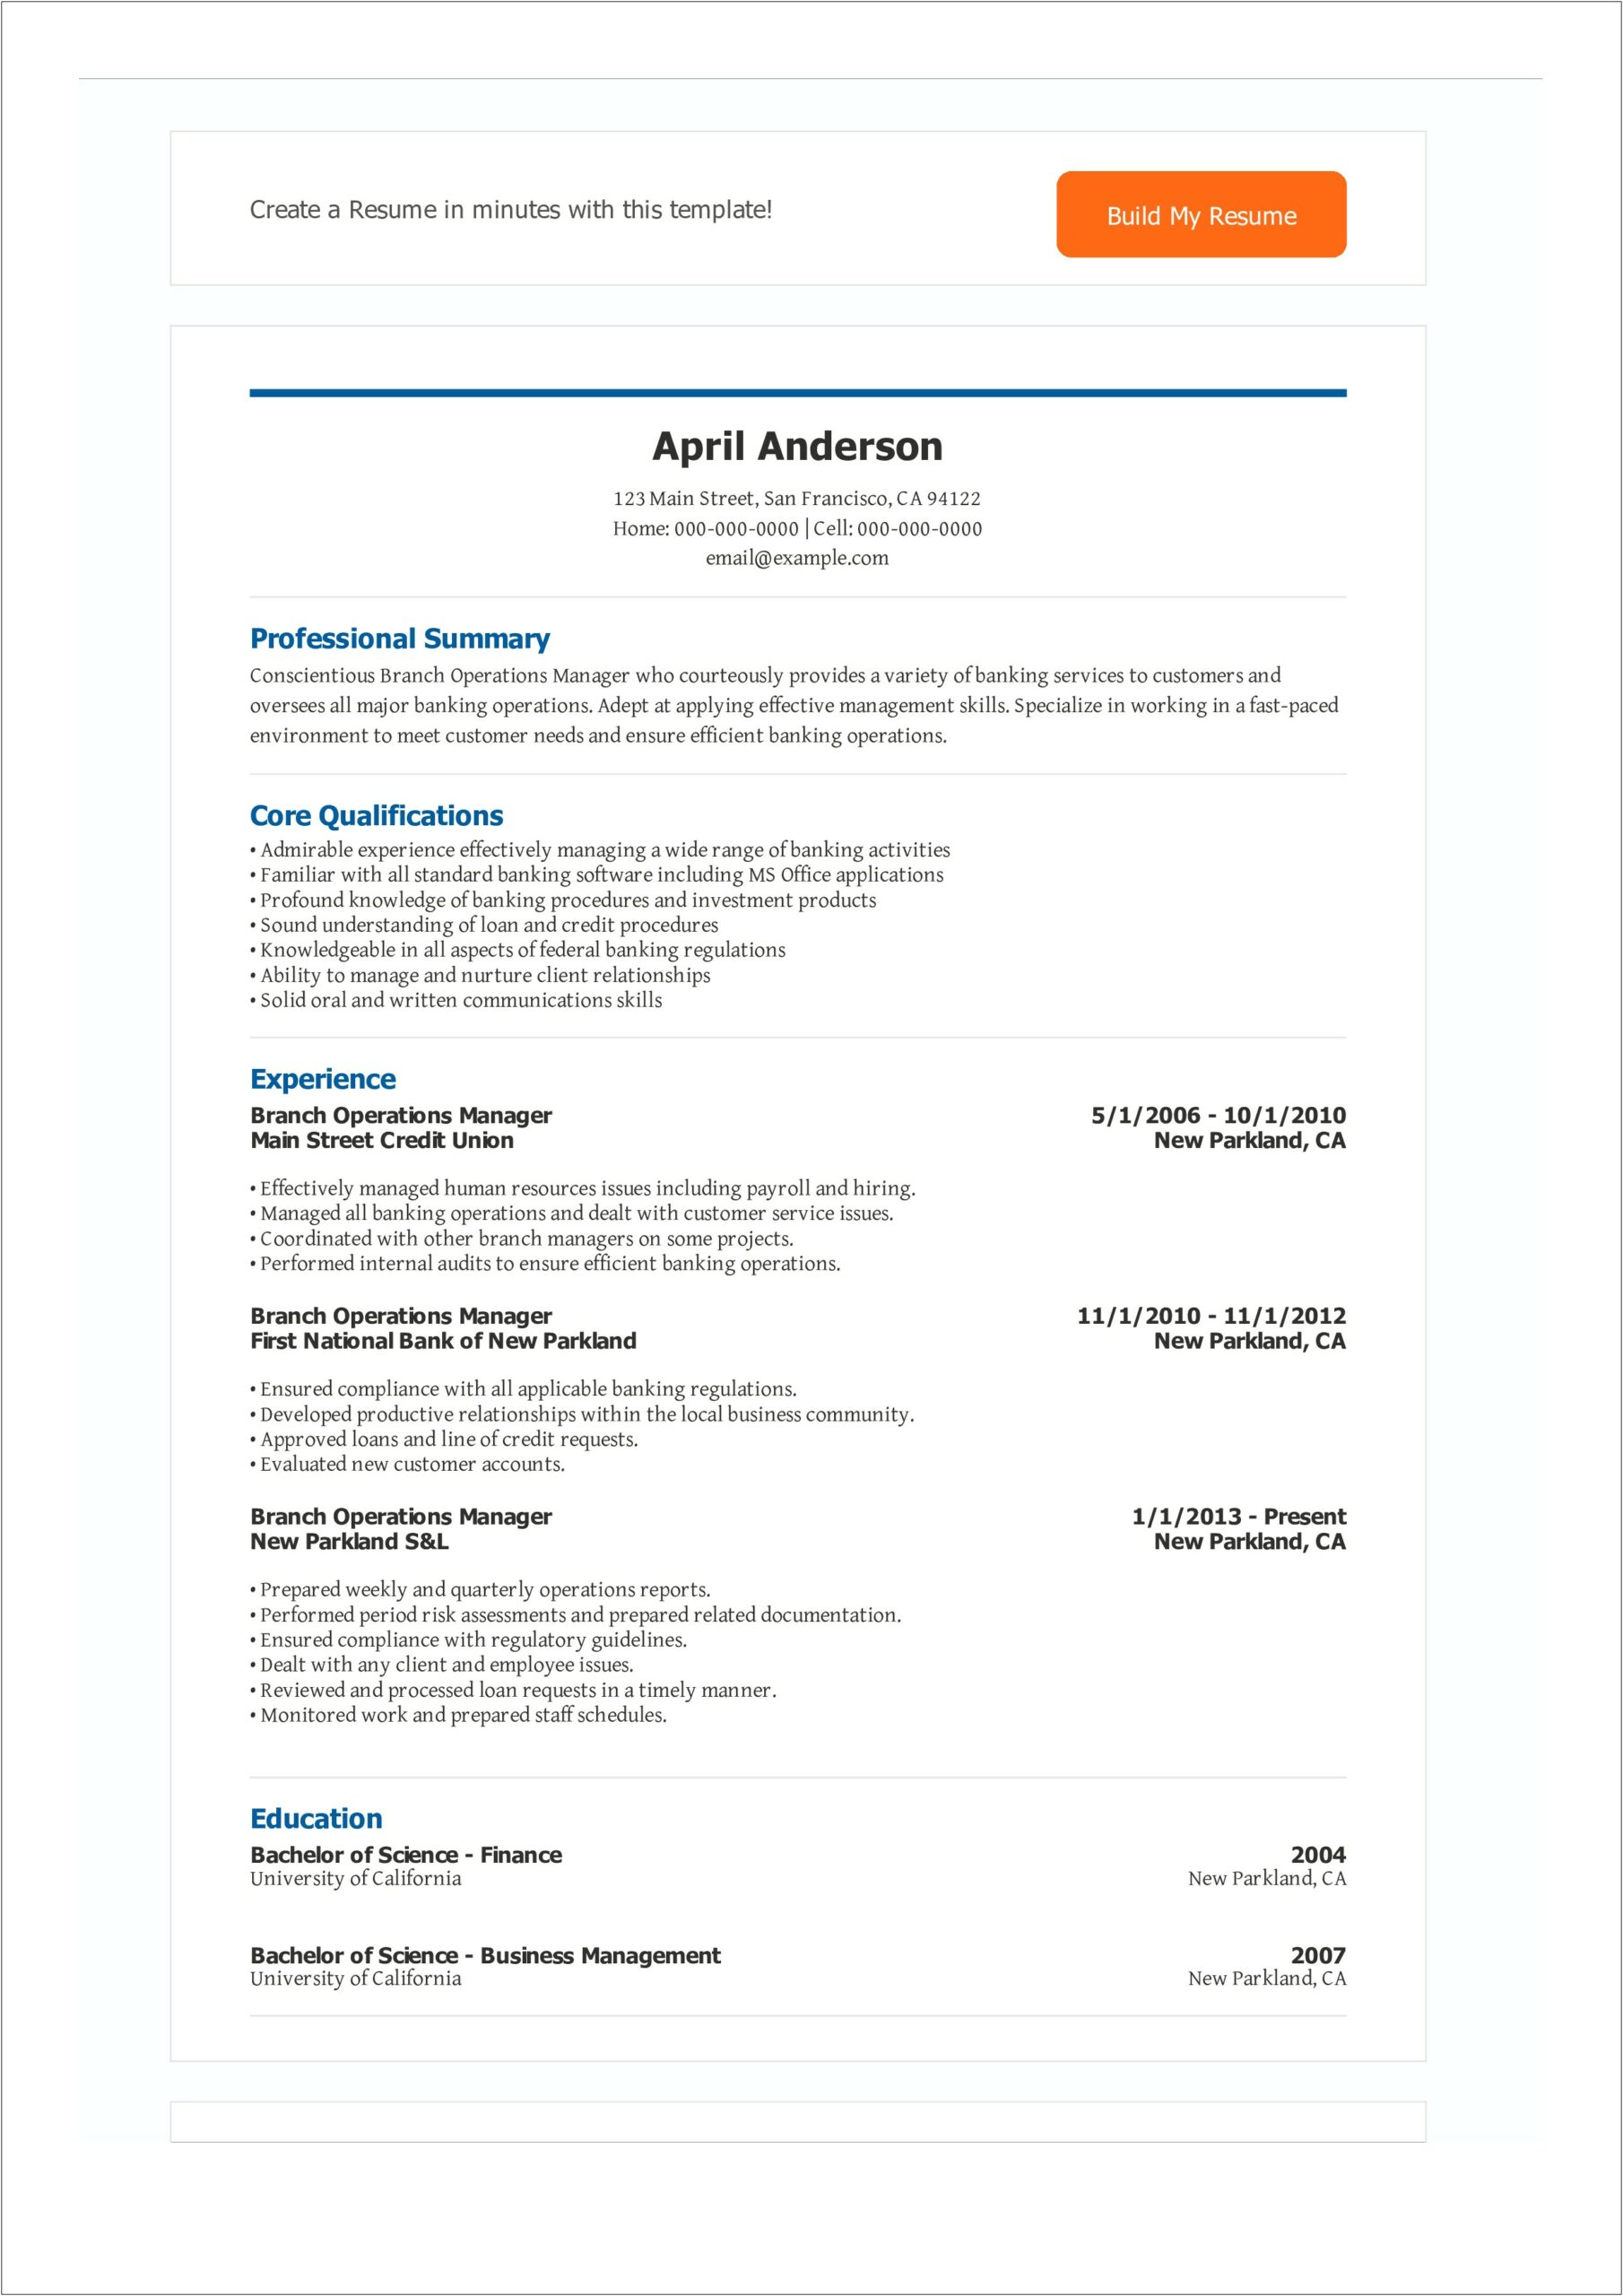 Resume Example For Bank Manager